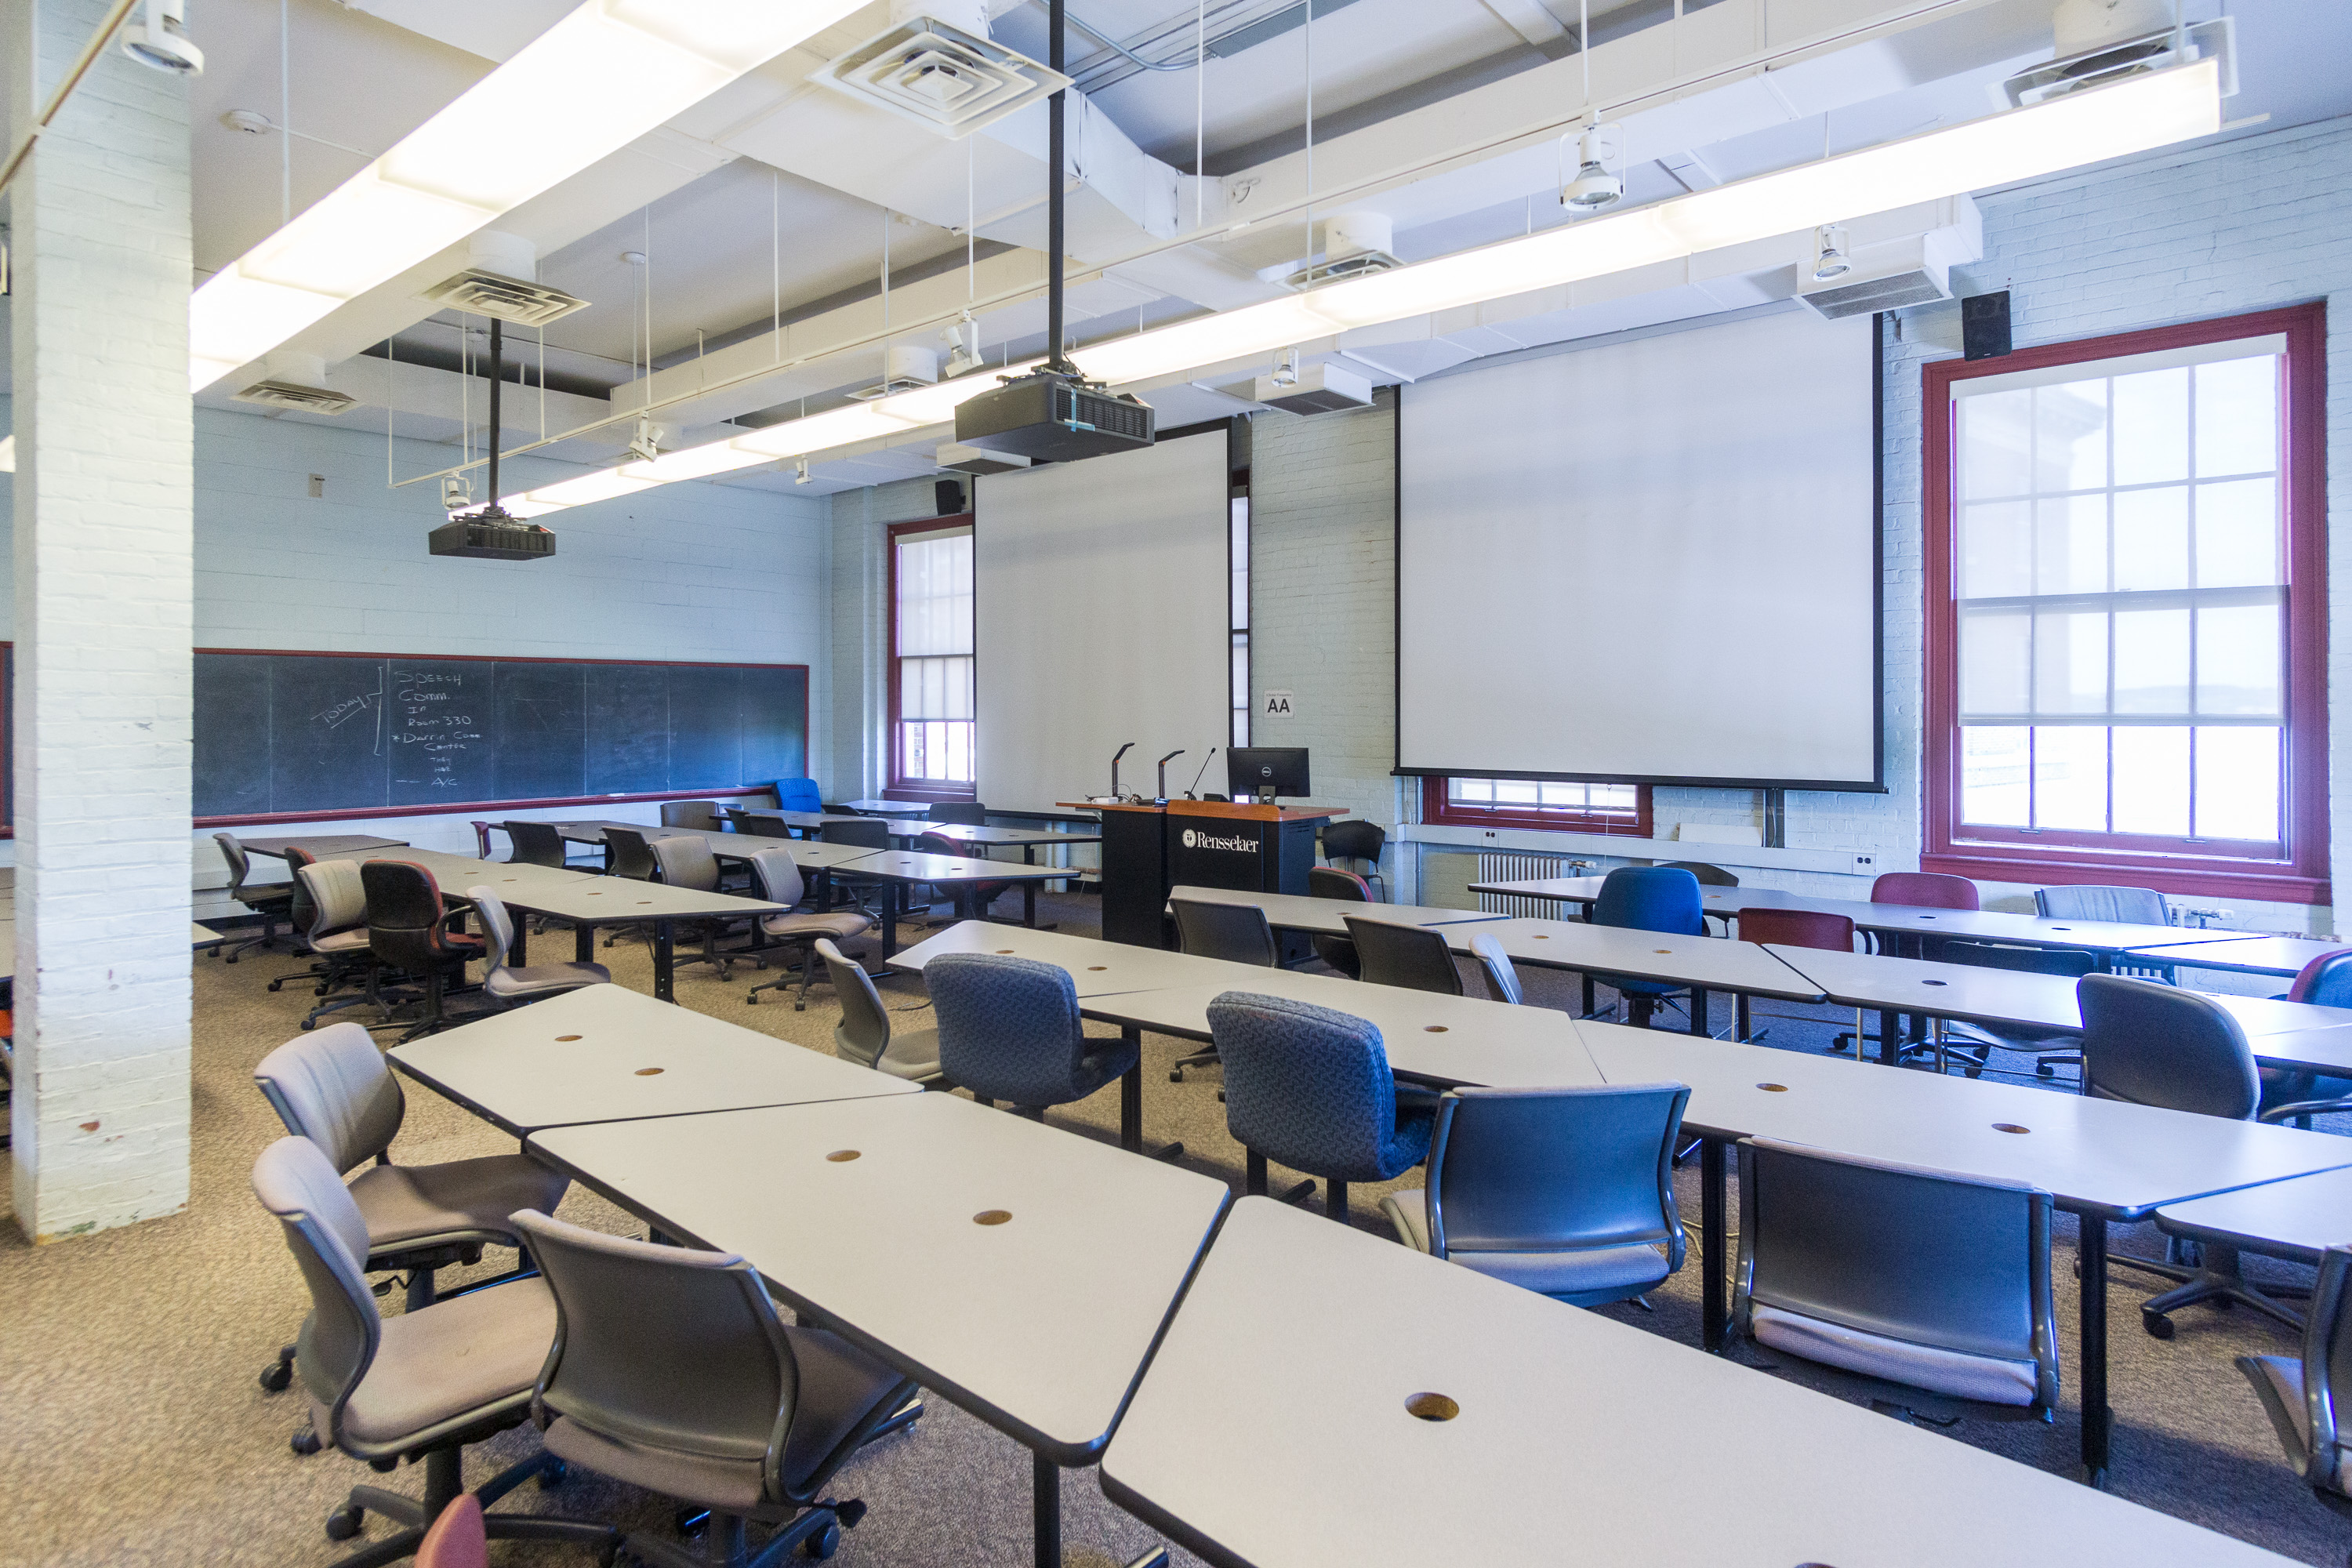 File:Classroom at Rensselaer Polytechnic Institute.jpg - Wikimedia Commons